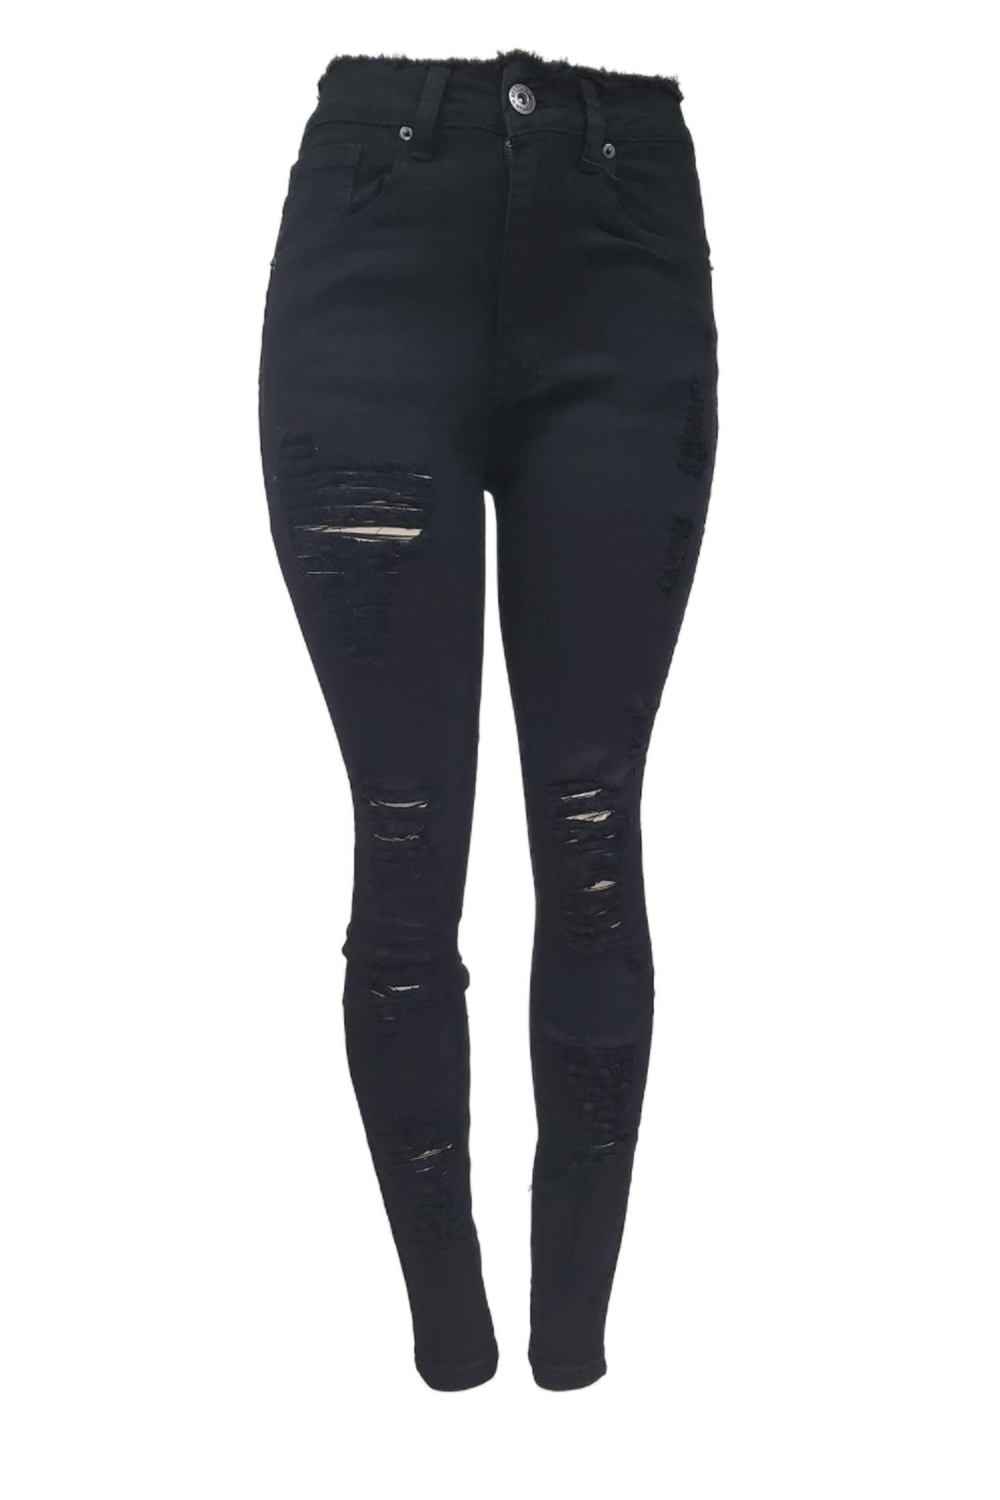 Red Fox HighWaist Ripped Black Women Jeans PA0410 – Last Stop Clothing ...